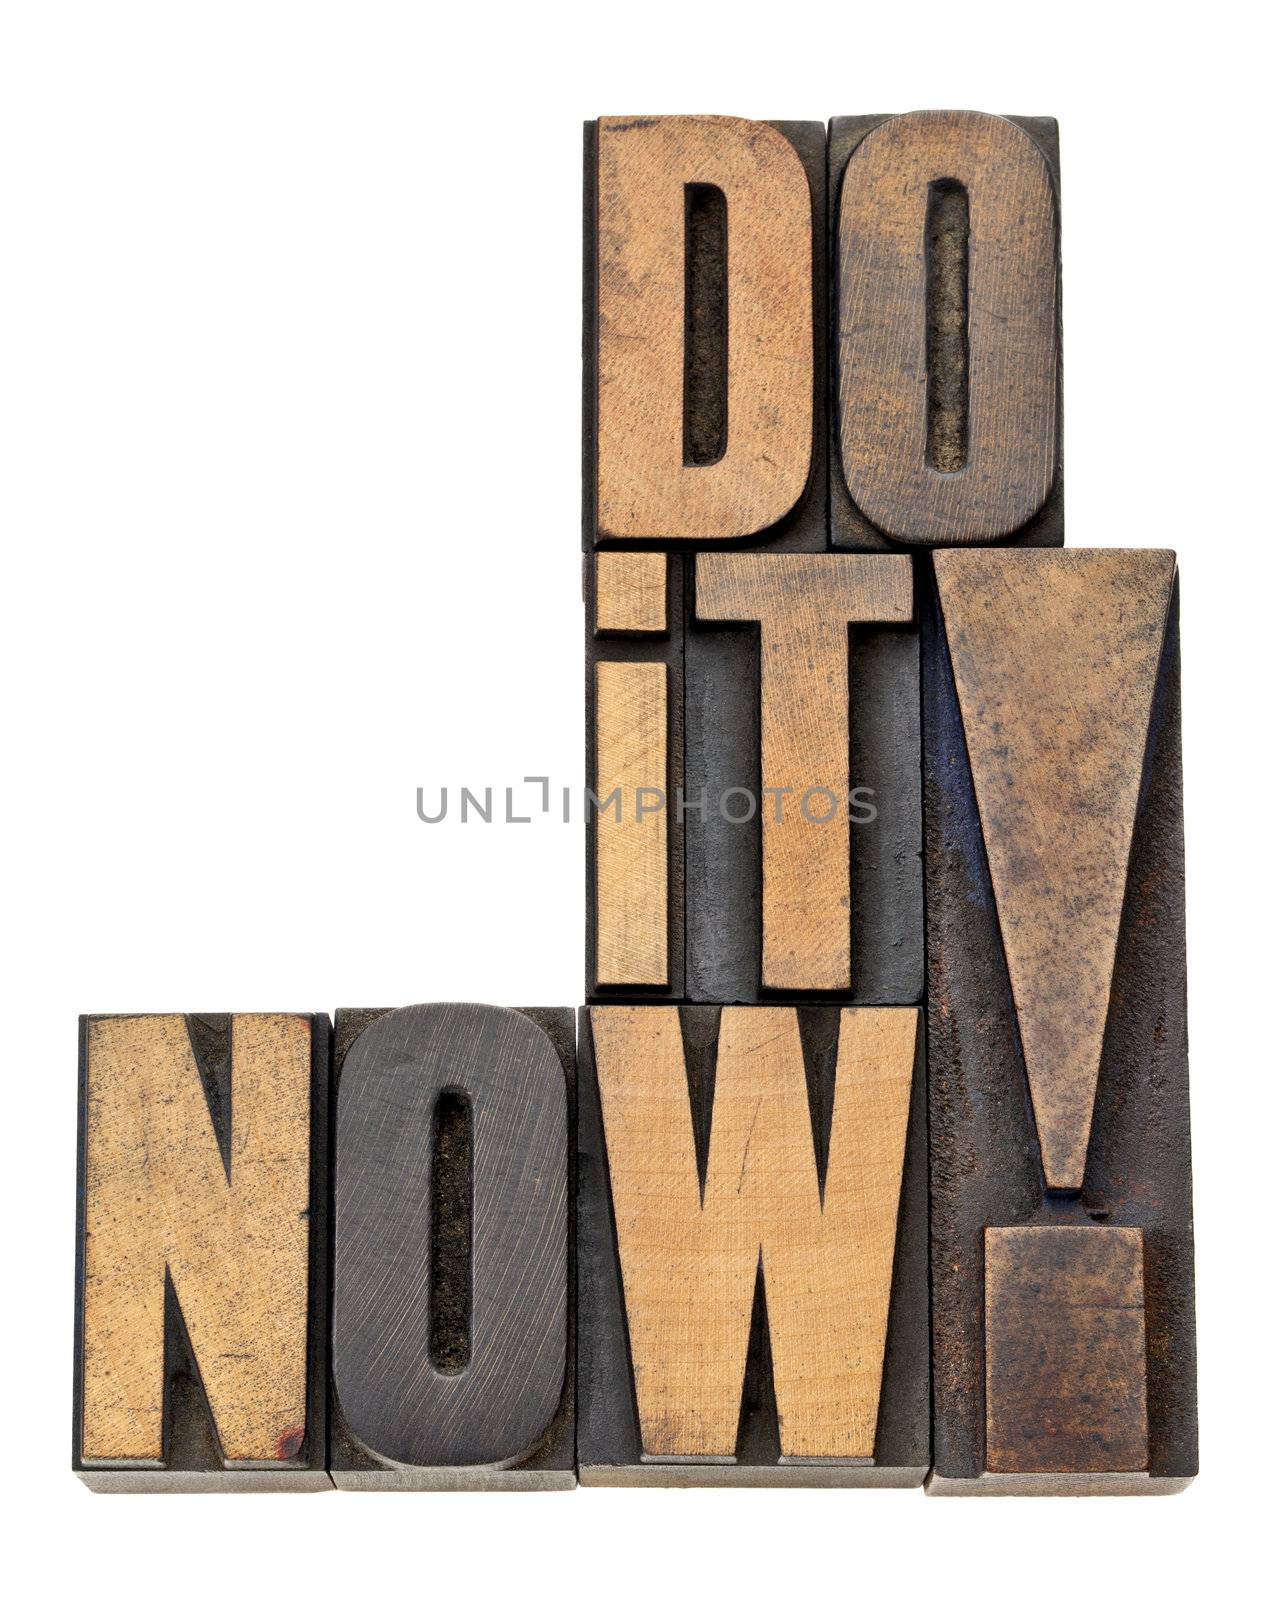 do it now - motivation and encouragement - isolated phrase in vintage letterpress wood type